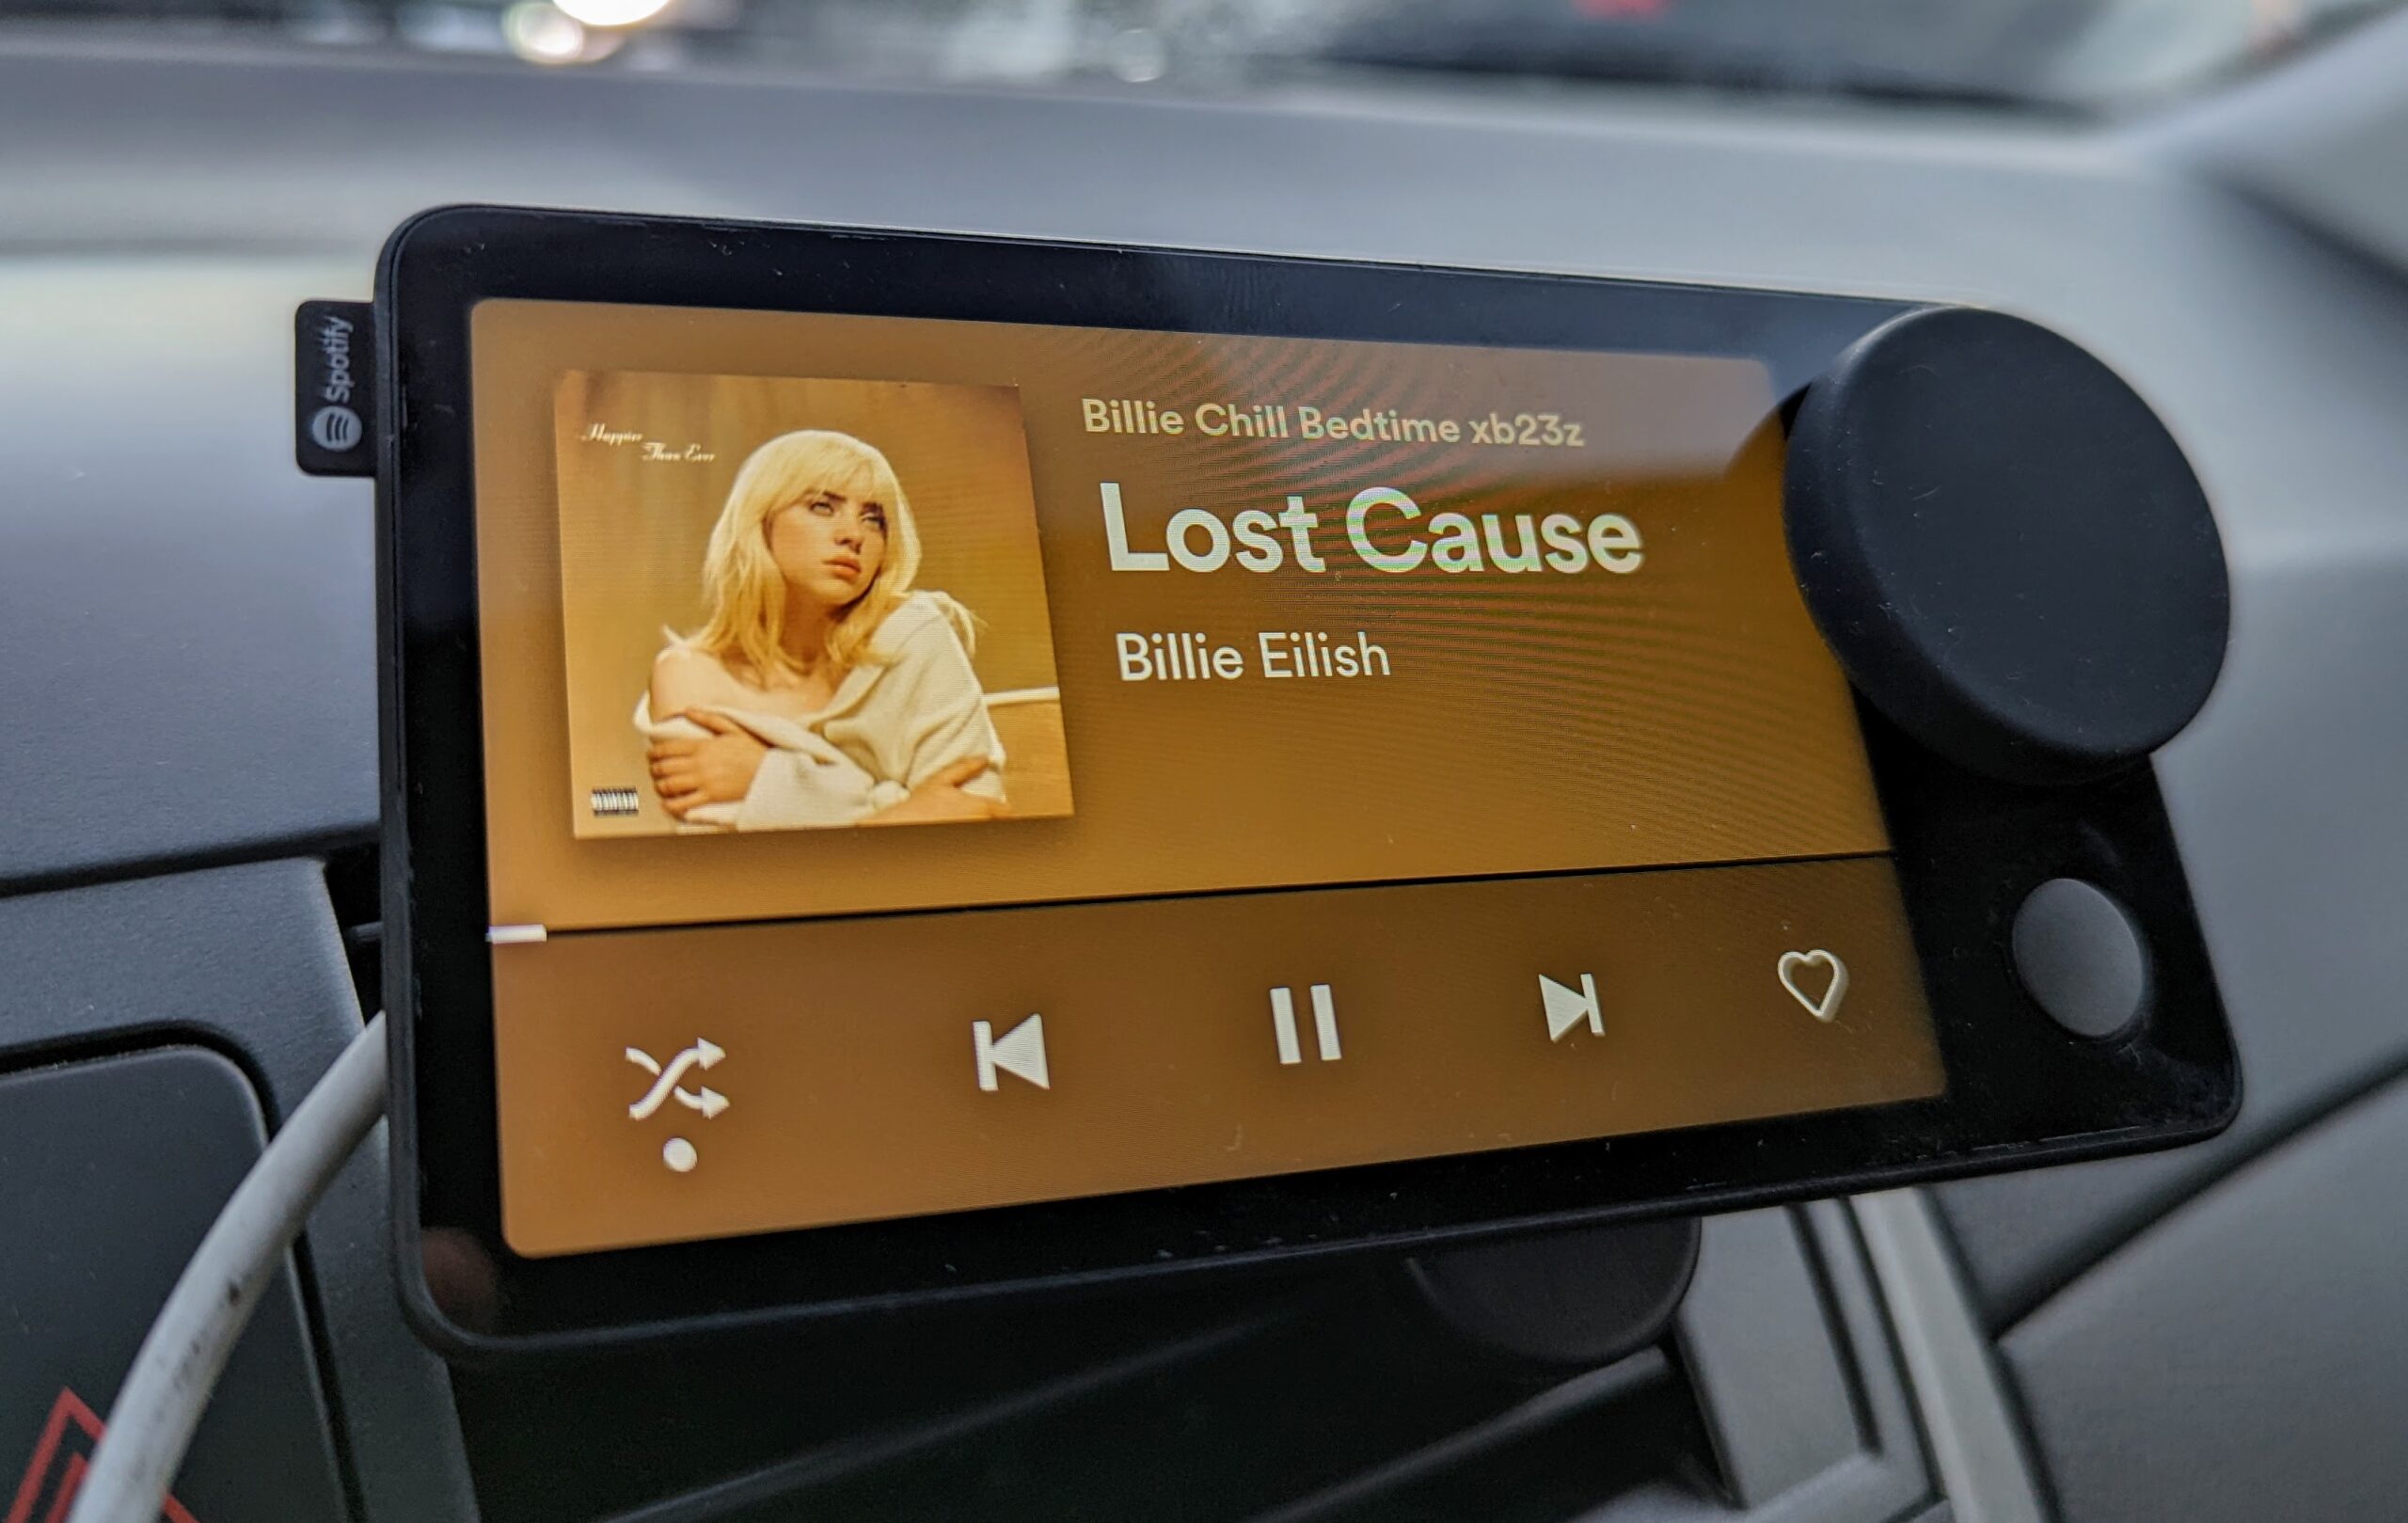 Spotify's first product could be an in-car device